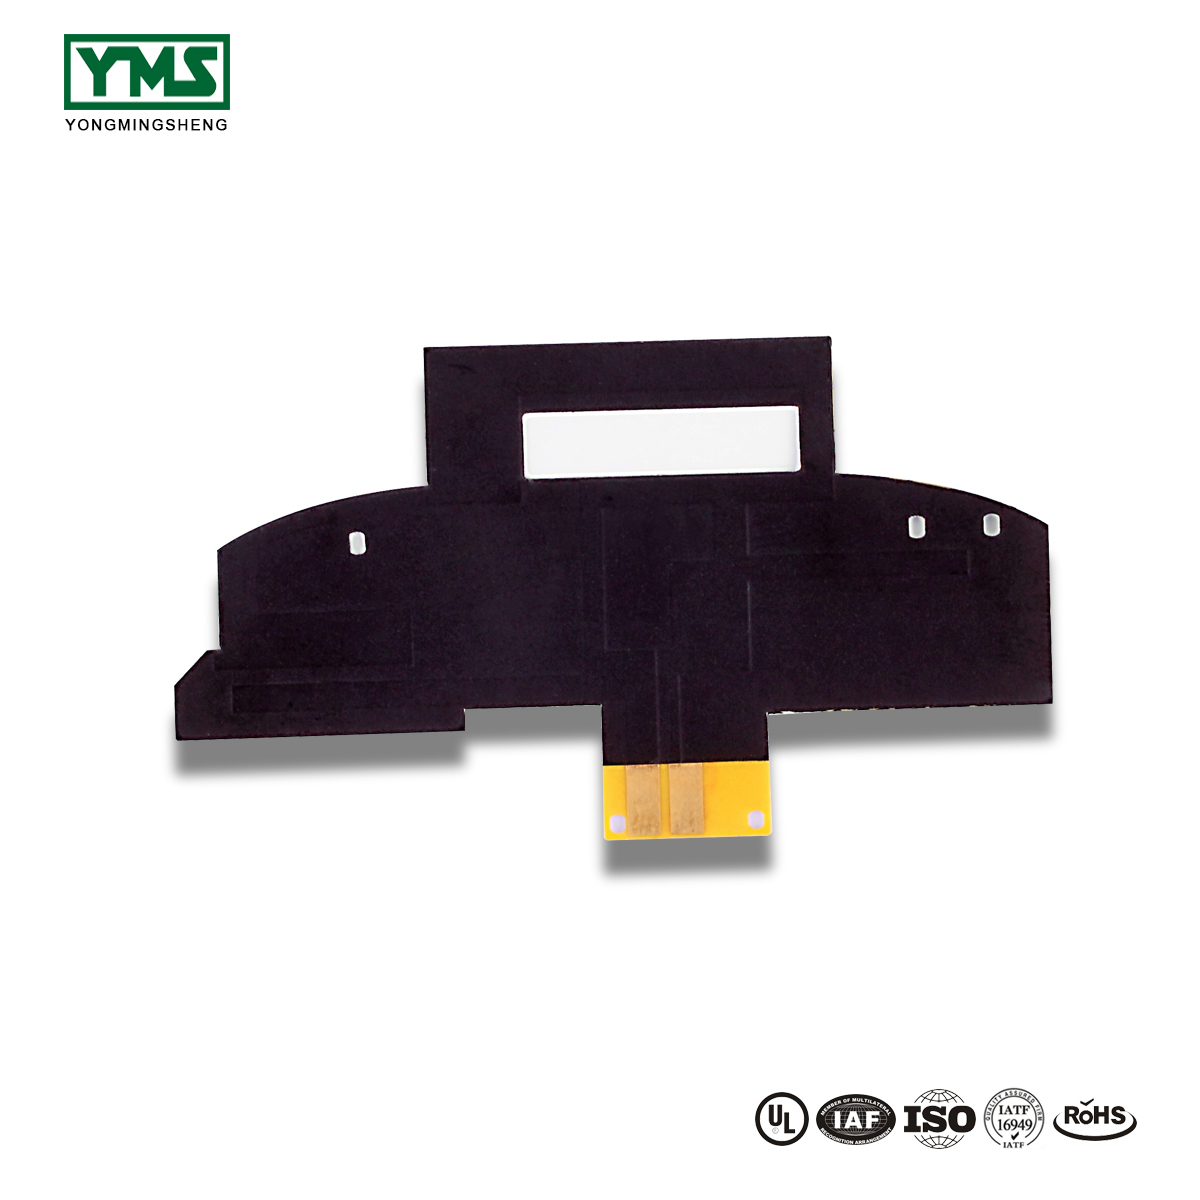 Manufacturing Companies for Selective Osp Pcb - 1layer  Cem-3 Stiffener flexible board | YMSPCB – Yongmingsheng